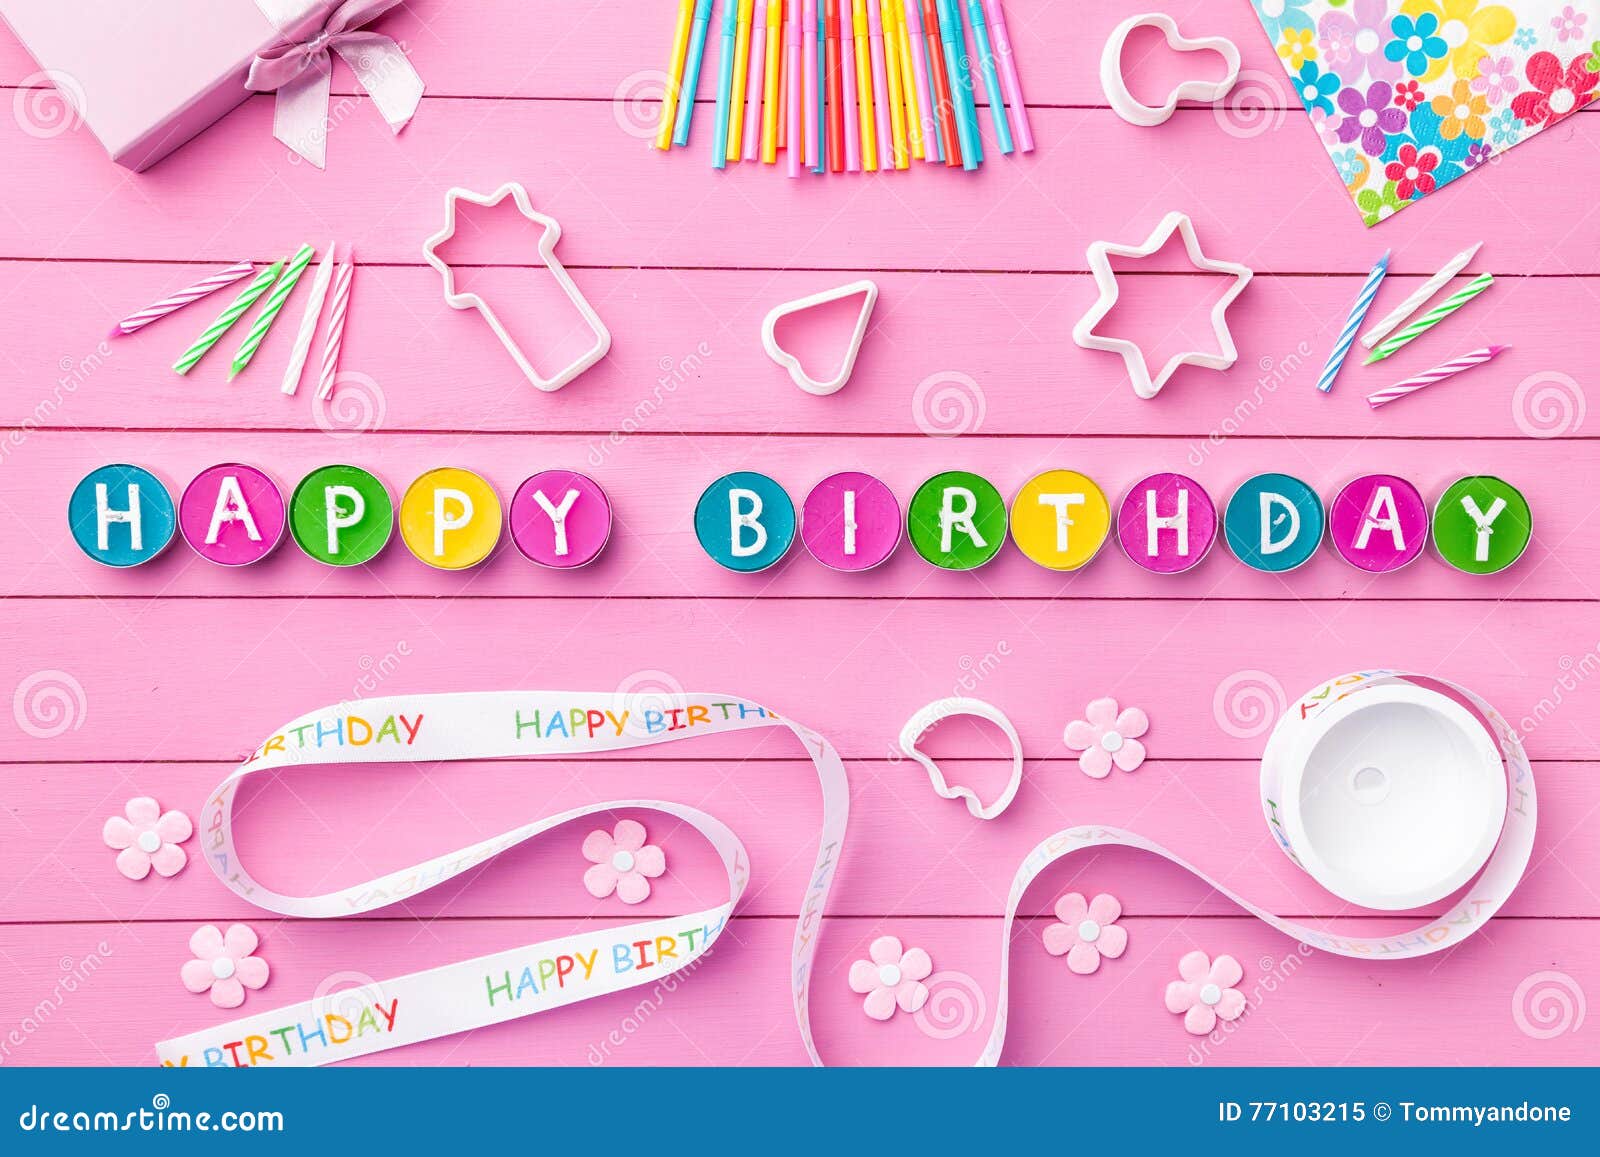 Colorful Happy Birthday Background Stock Image - Image of greeting ...